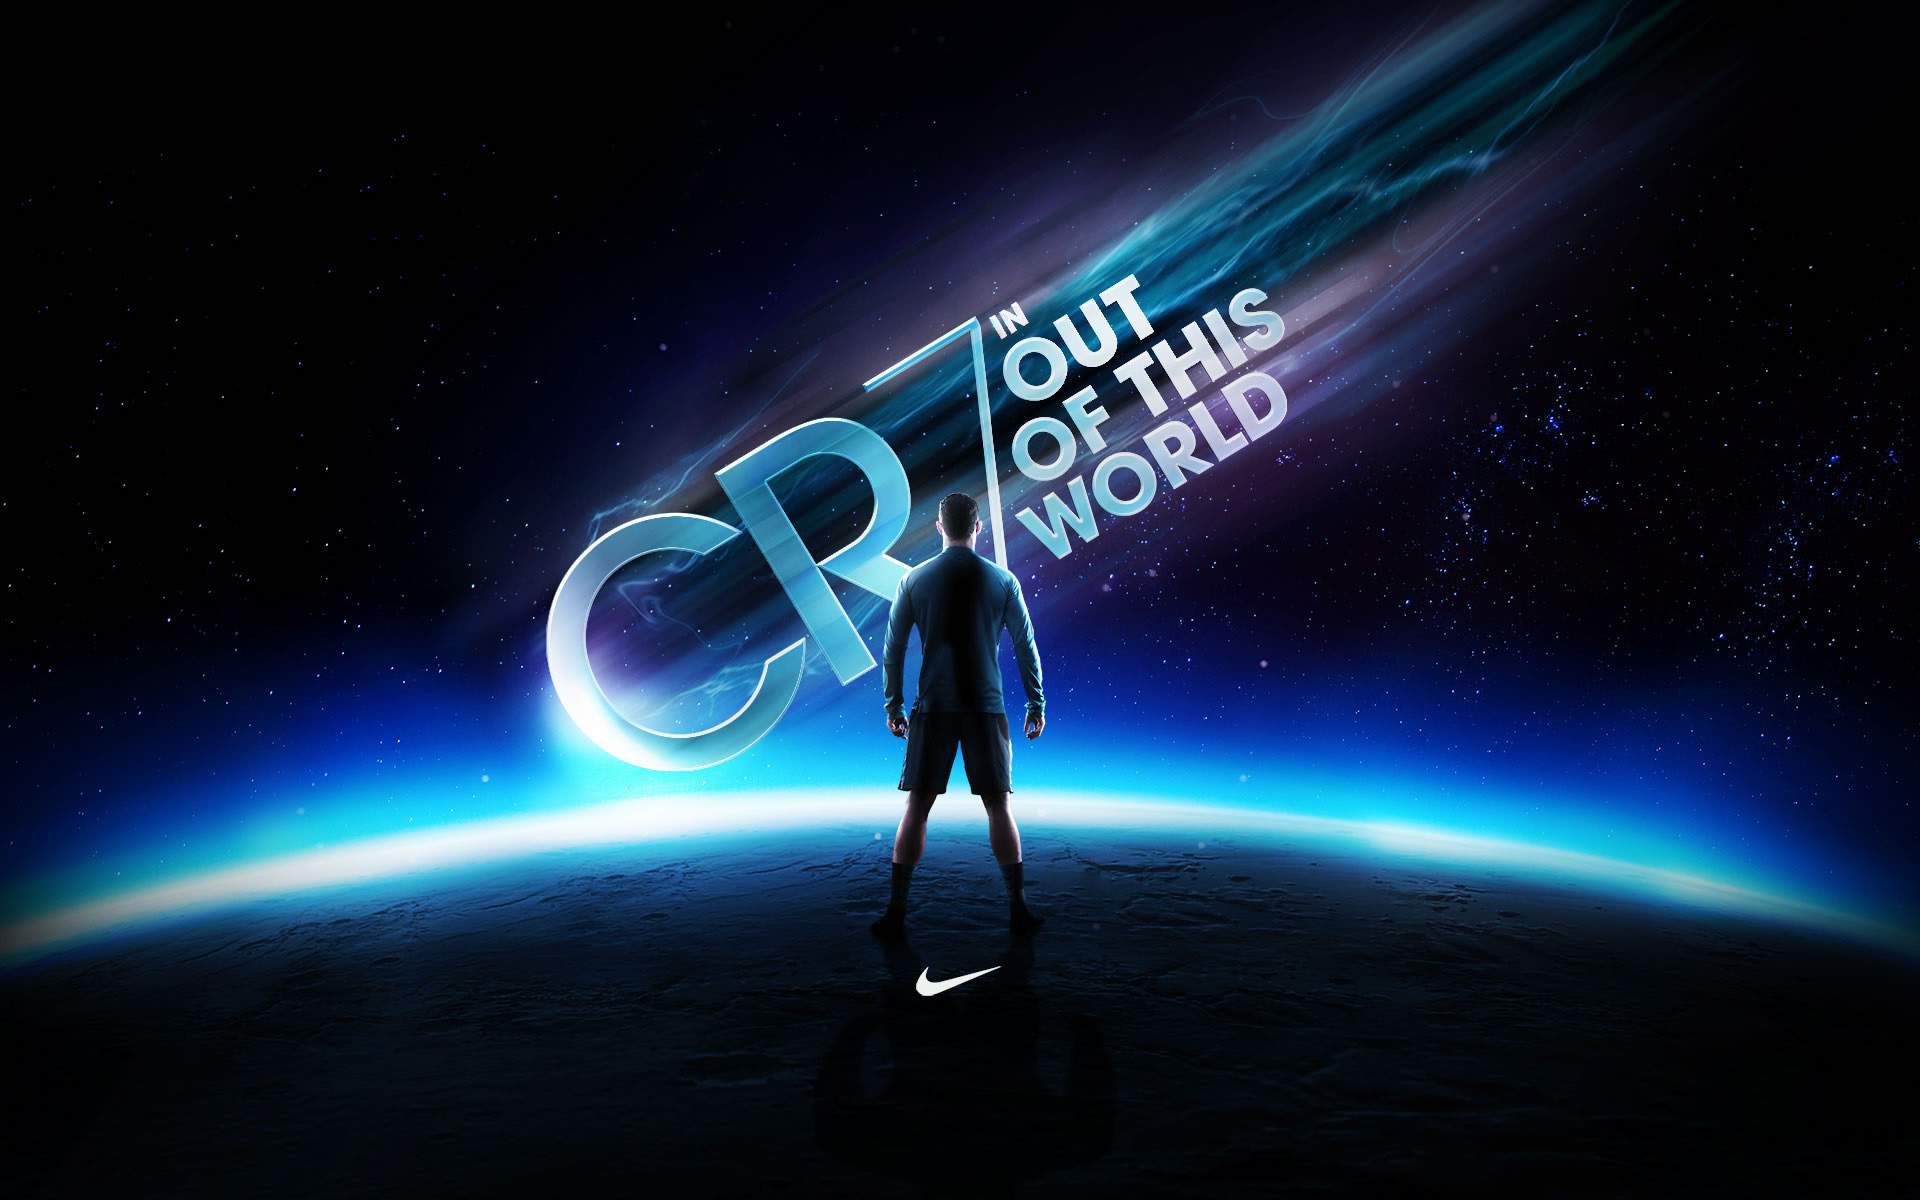 1920x1200 CR7: “Out of this world” Nike Wallpaper